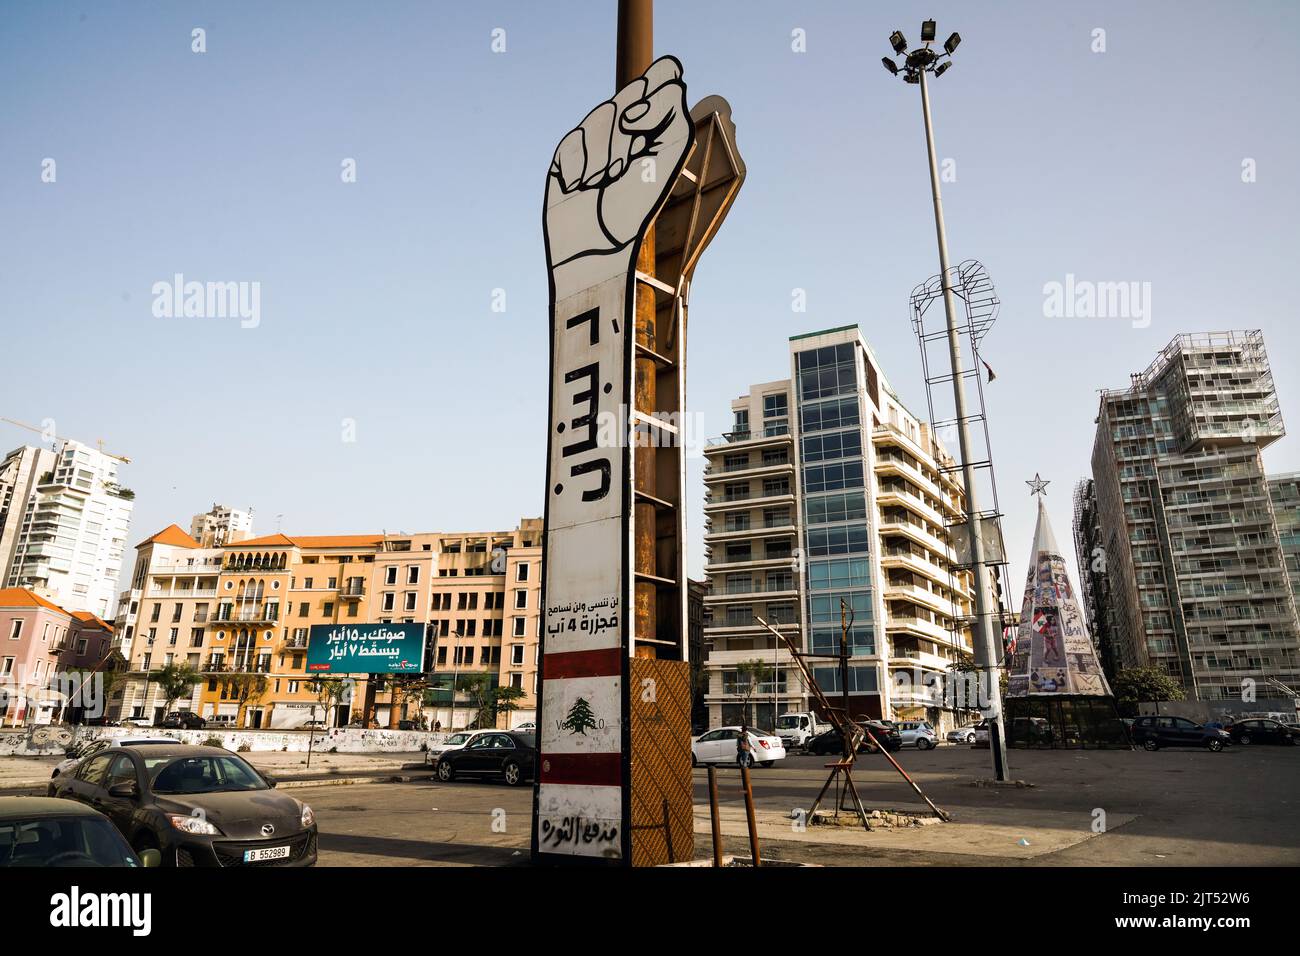 Beirut, Lebanon: Fist of the Revolution in Martyrs' Square in the city of Beirut Stock Photo